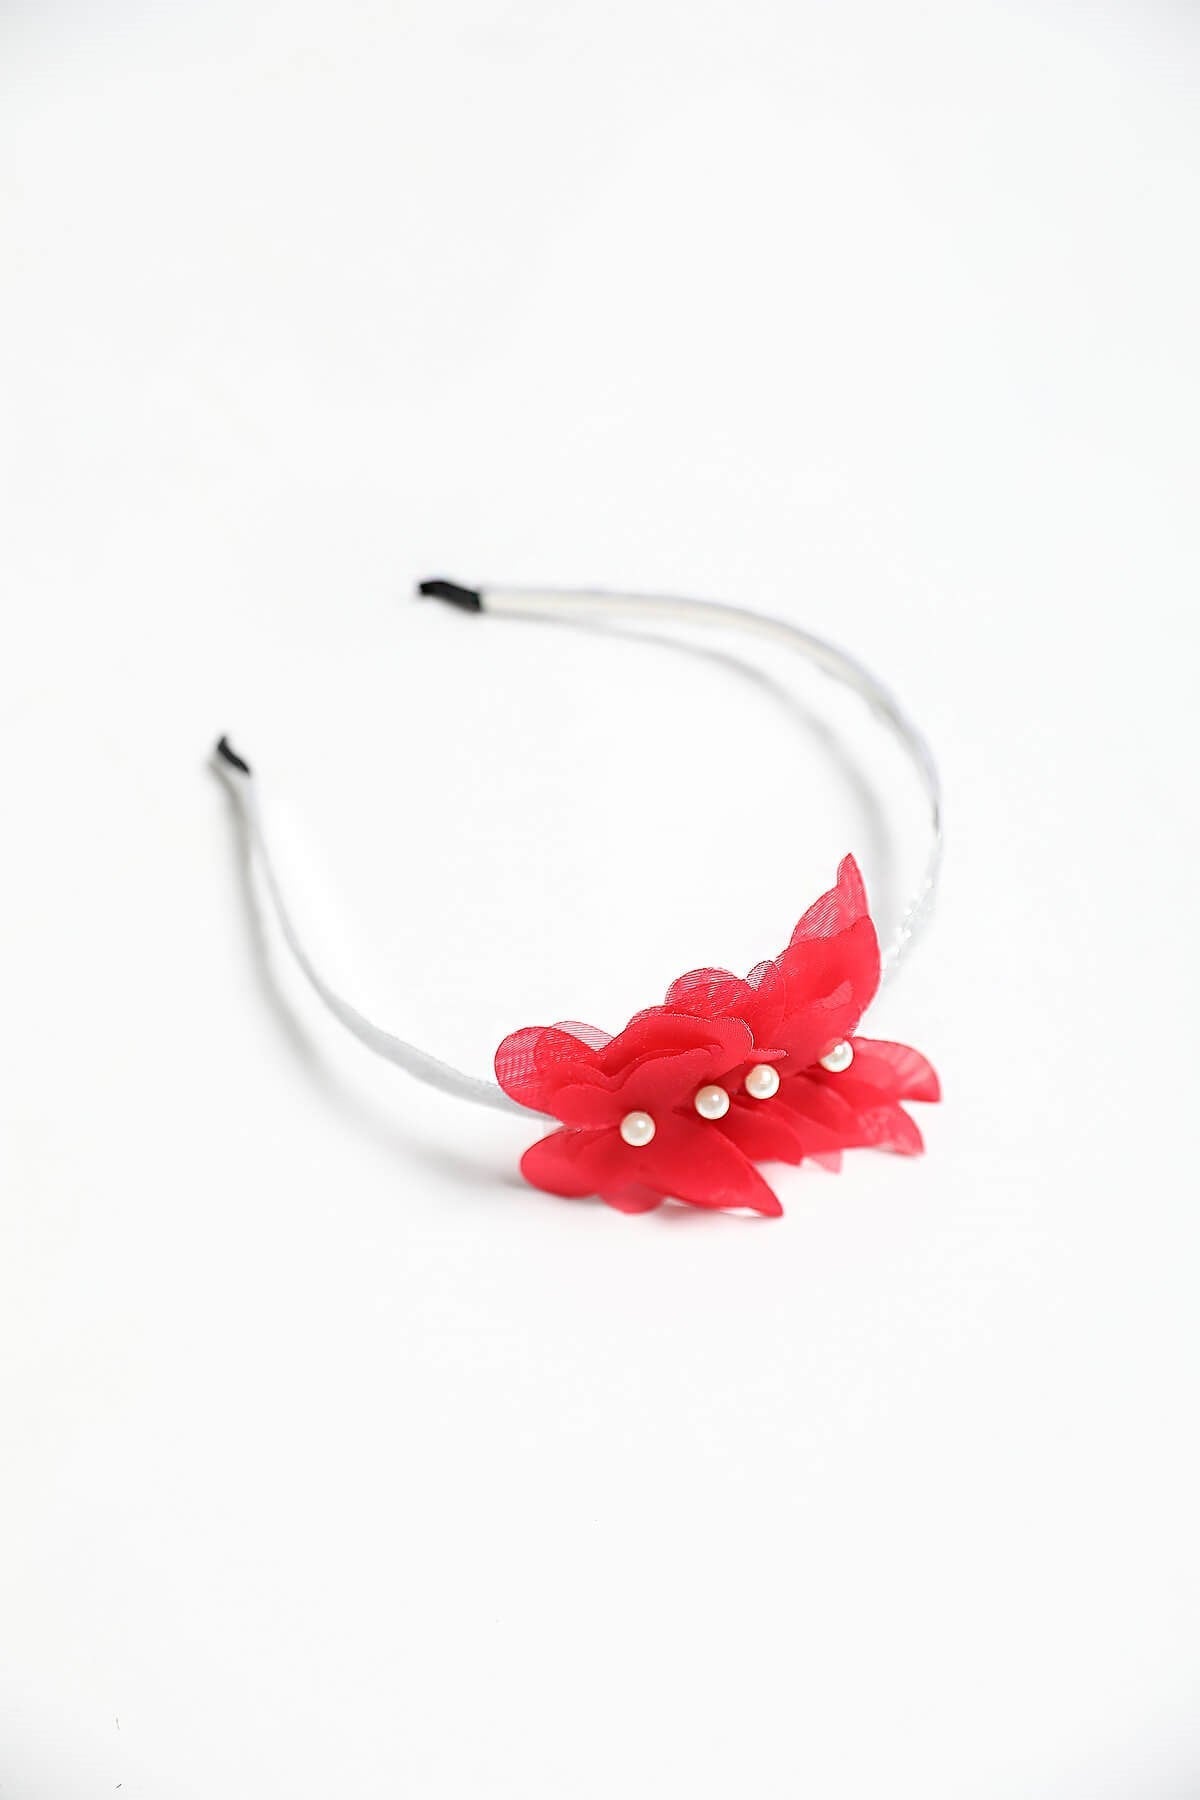 Lht 16089 Red Butterflies Maternity Crown